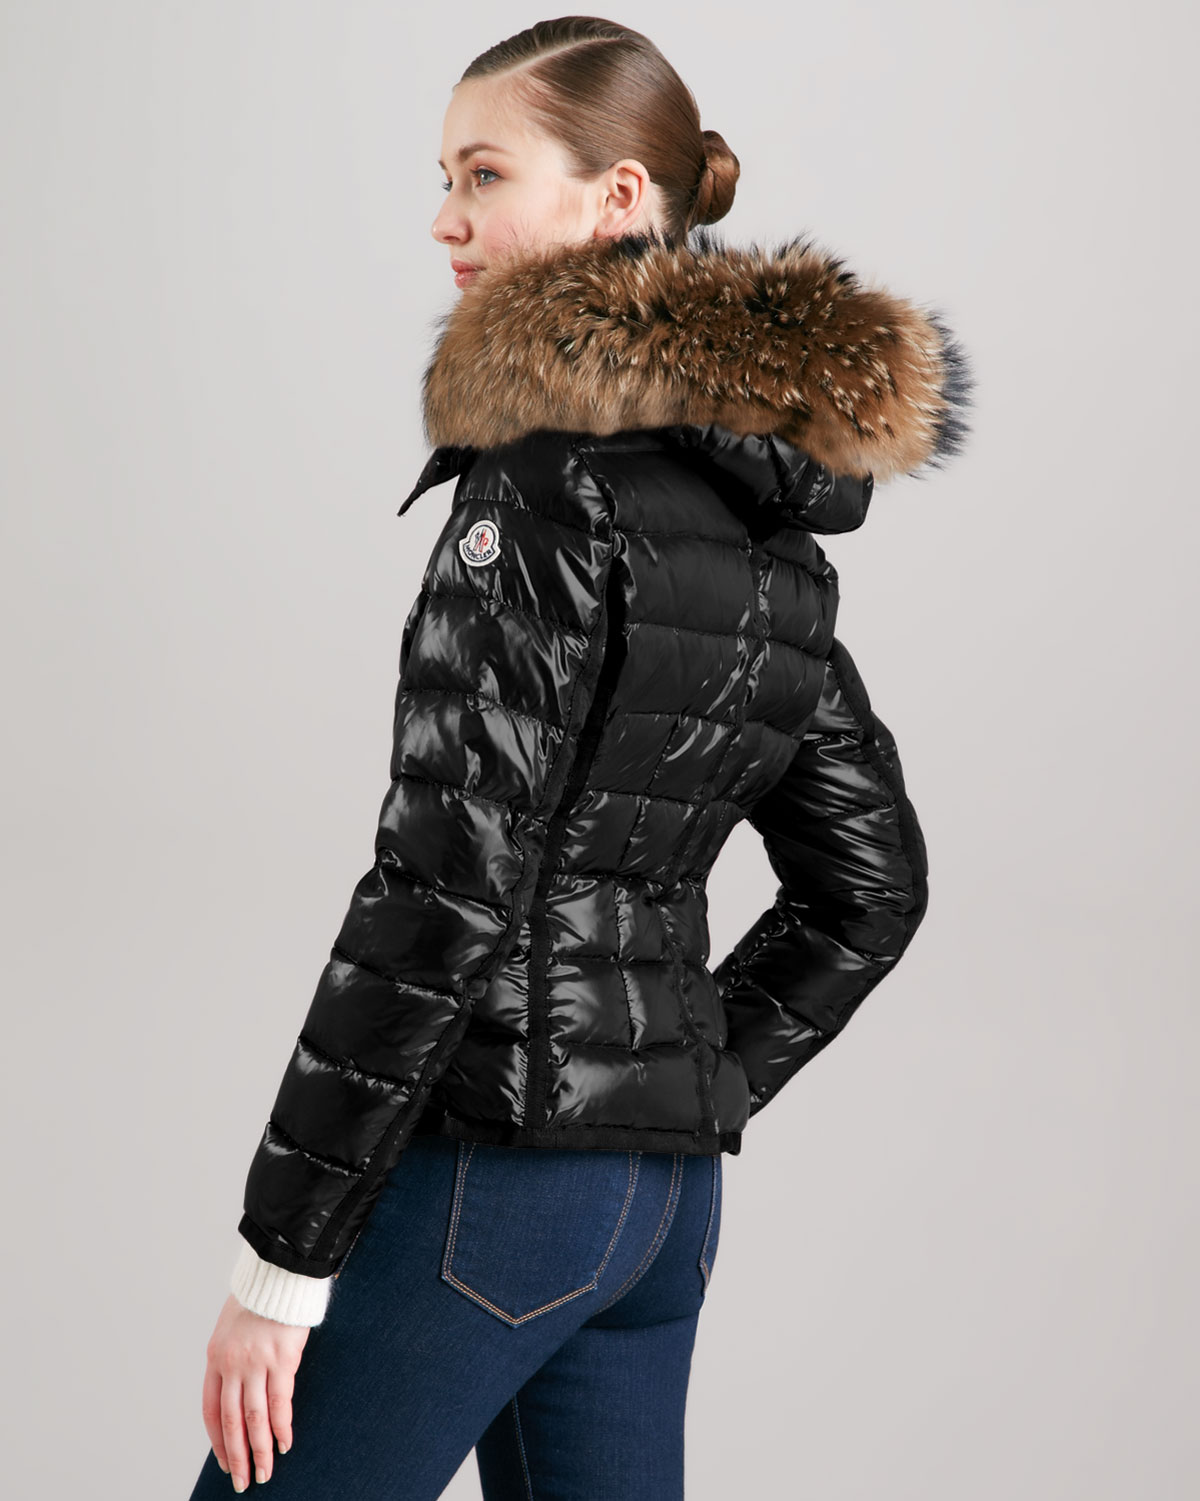 Moncler Short Puffer Jacket with Furtrimmed Hood in Black | Lyst